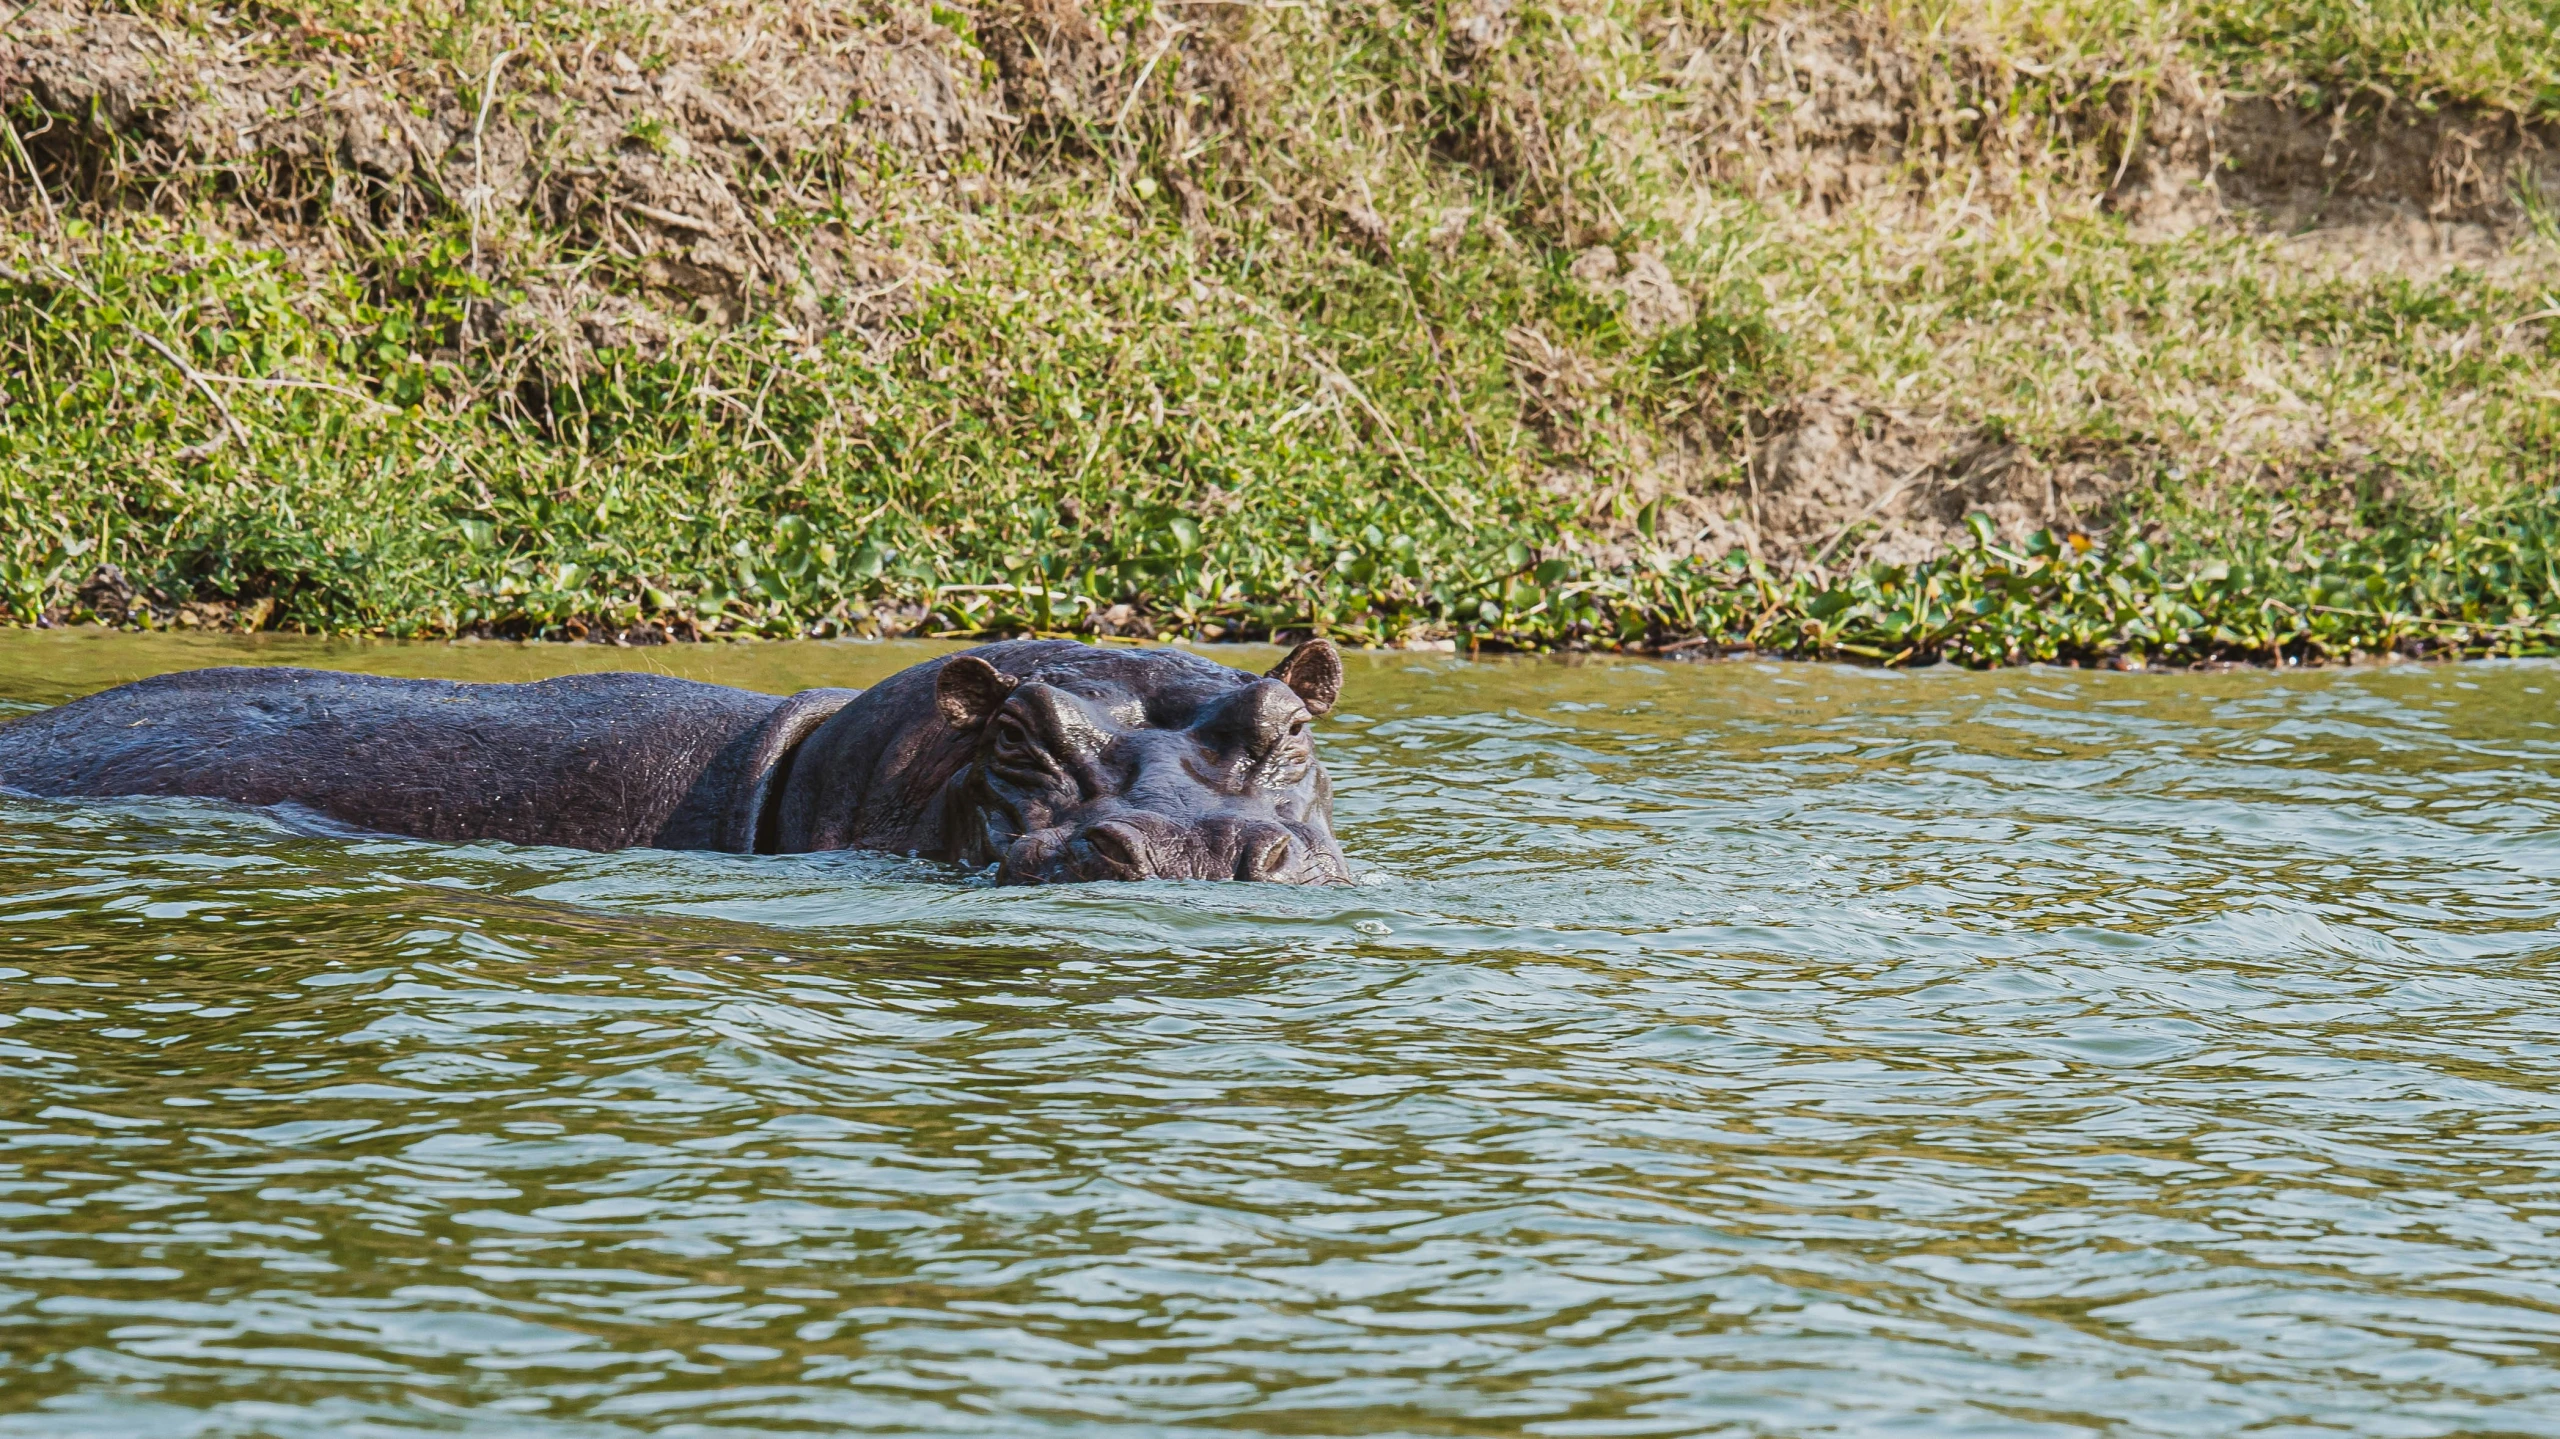 a hippo floating in a river near lush green vegetation